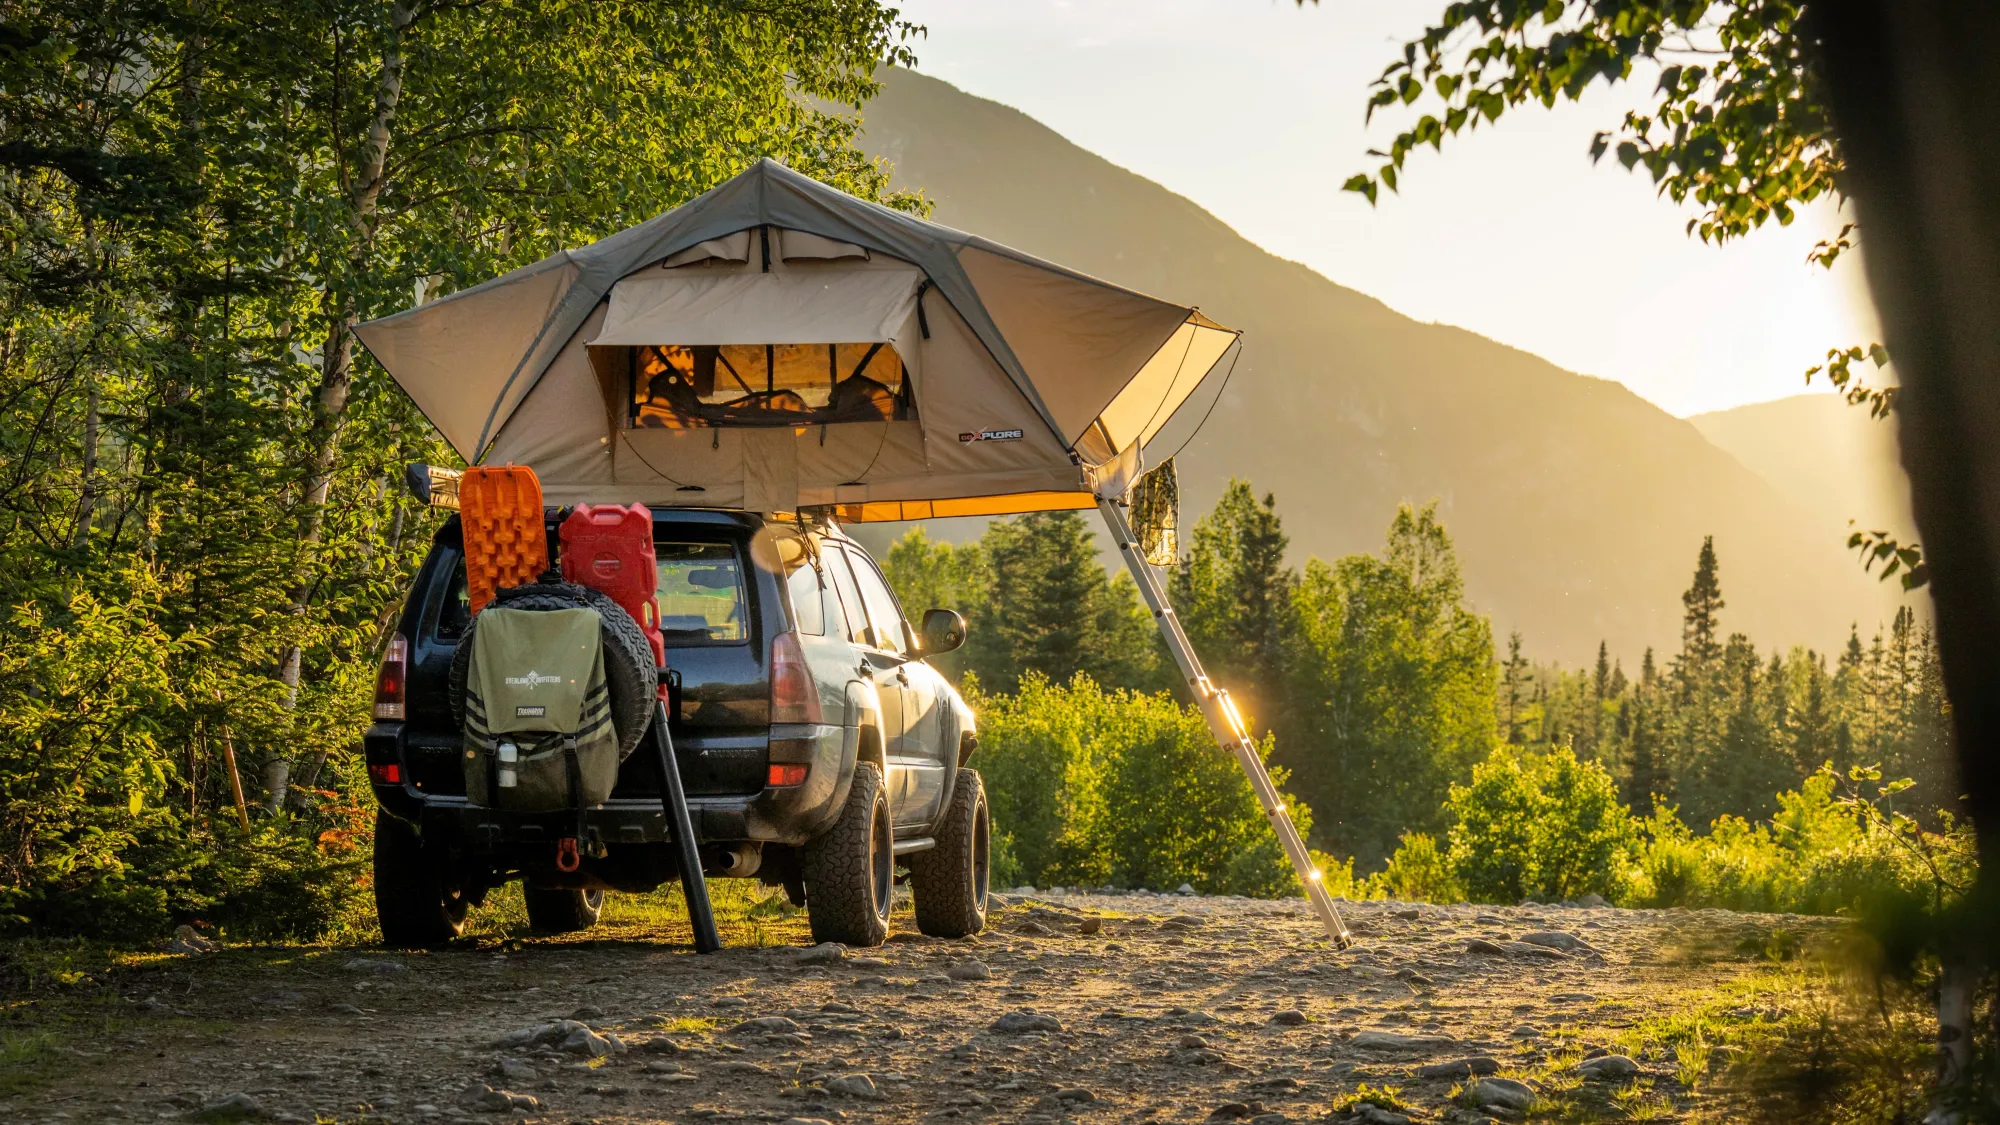 Image of car camping in the mountains